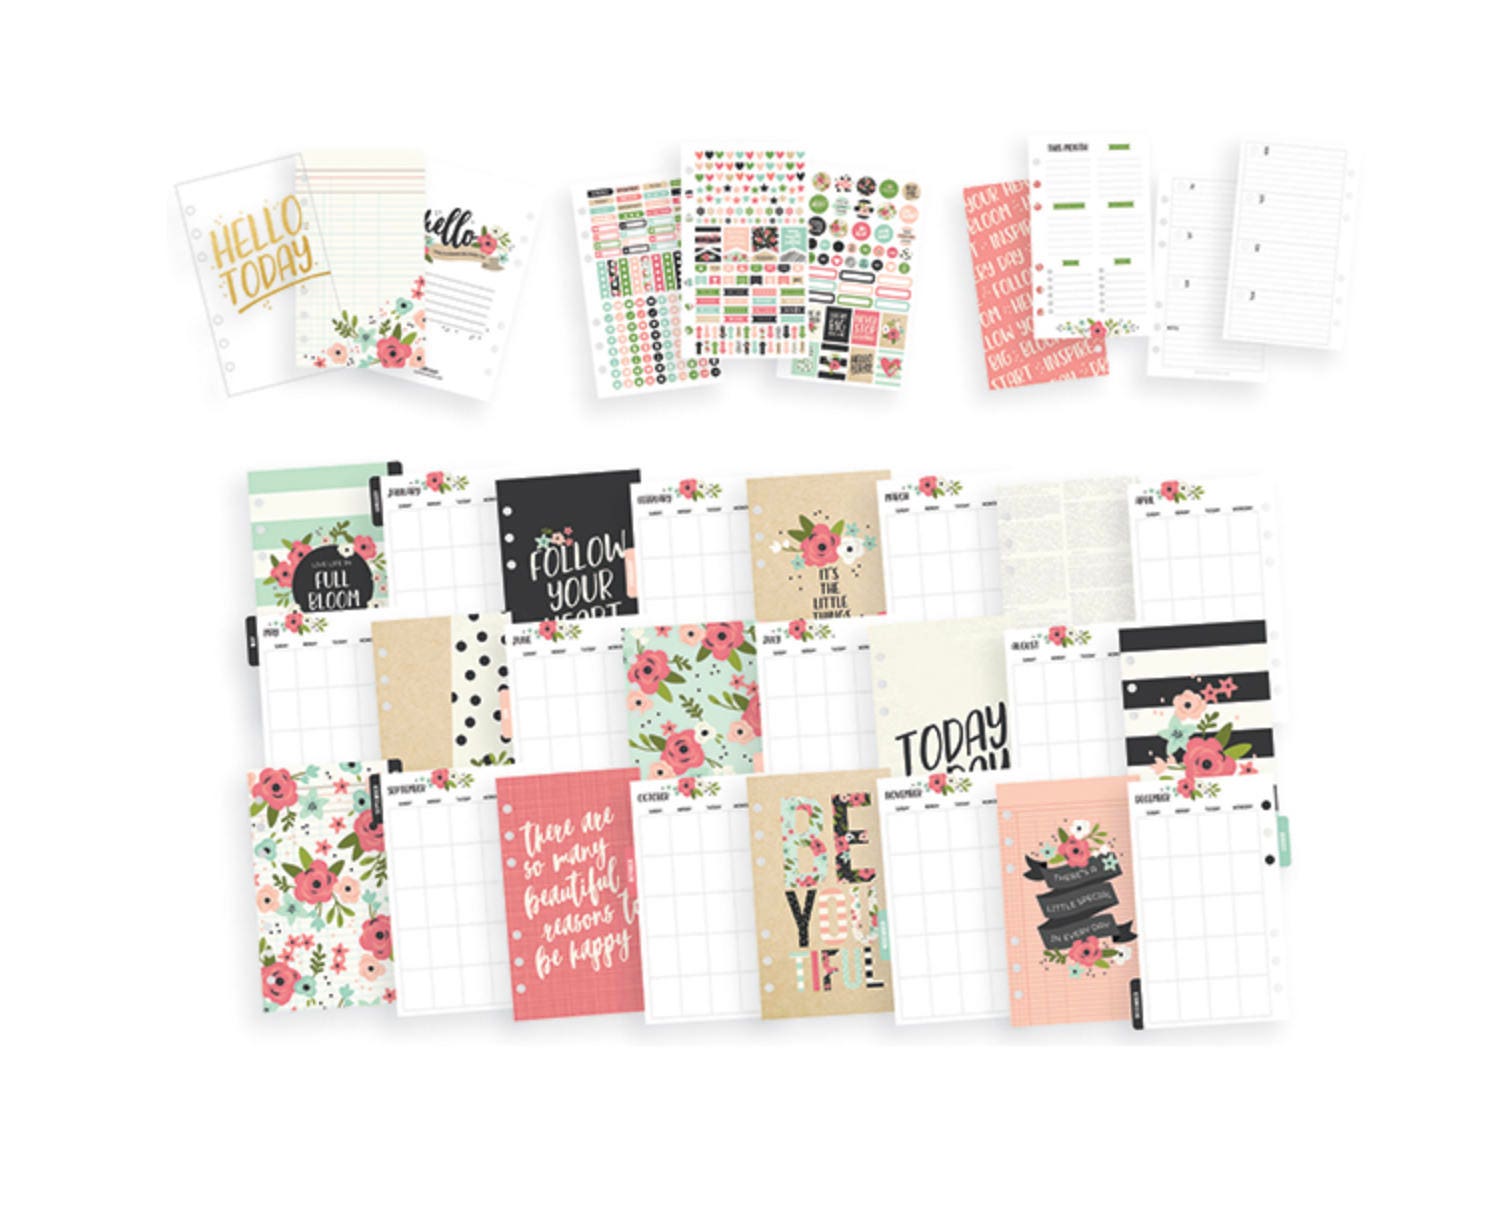 Simple Stories Carpe Diem planner giveaway! And Cyber Monday